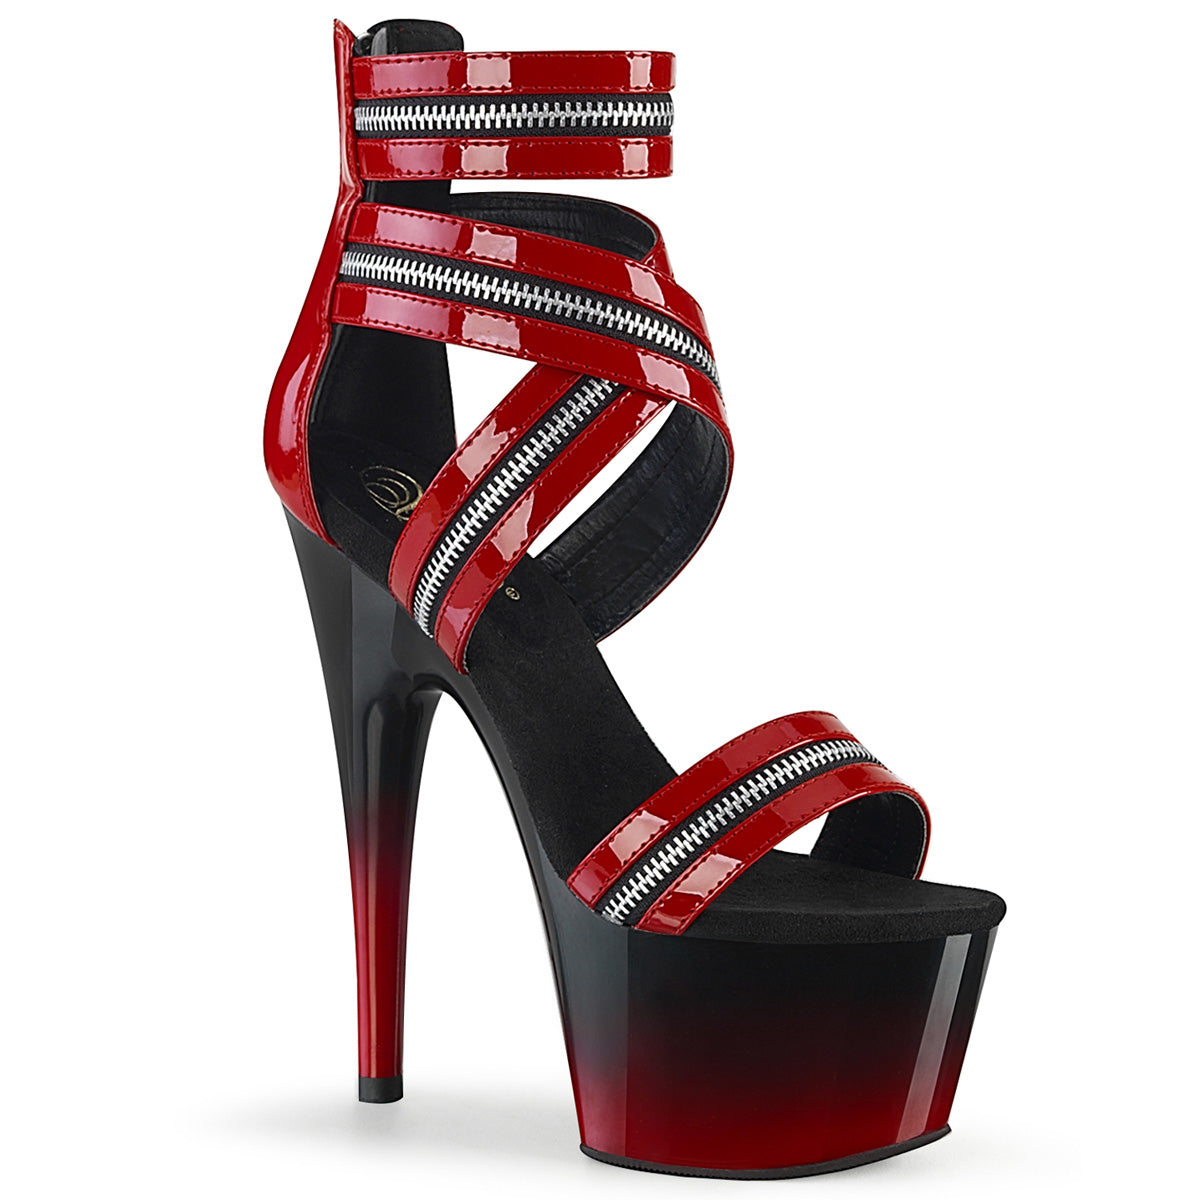 PLEASER ADORE-766 RED BLACK ZIPPER STRAPPY 7 INCH HIGH HEEL PLATFORM SHOES SIZE 8 SALE